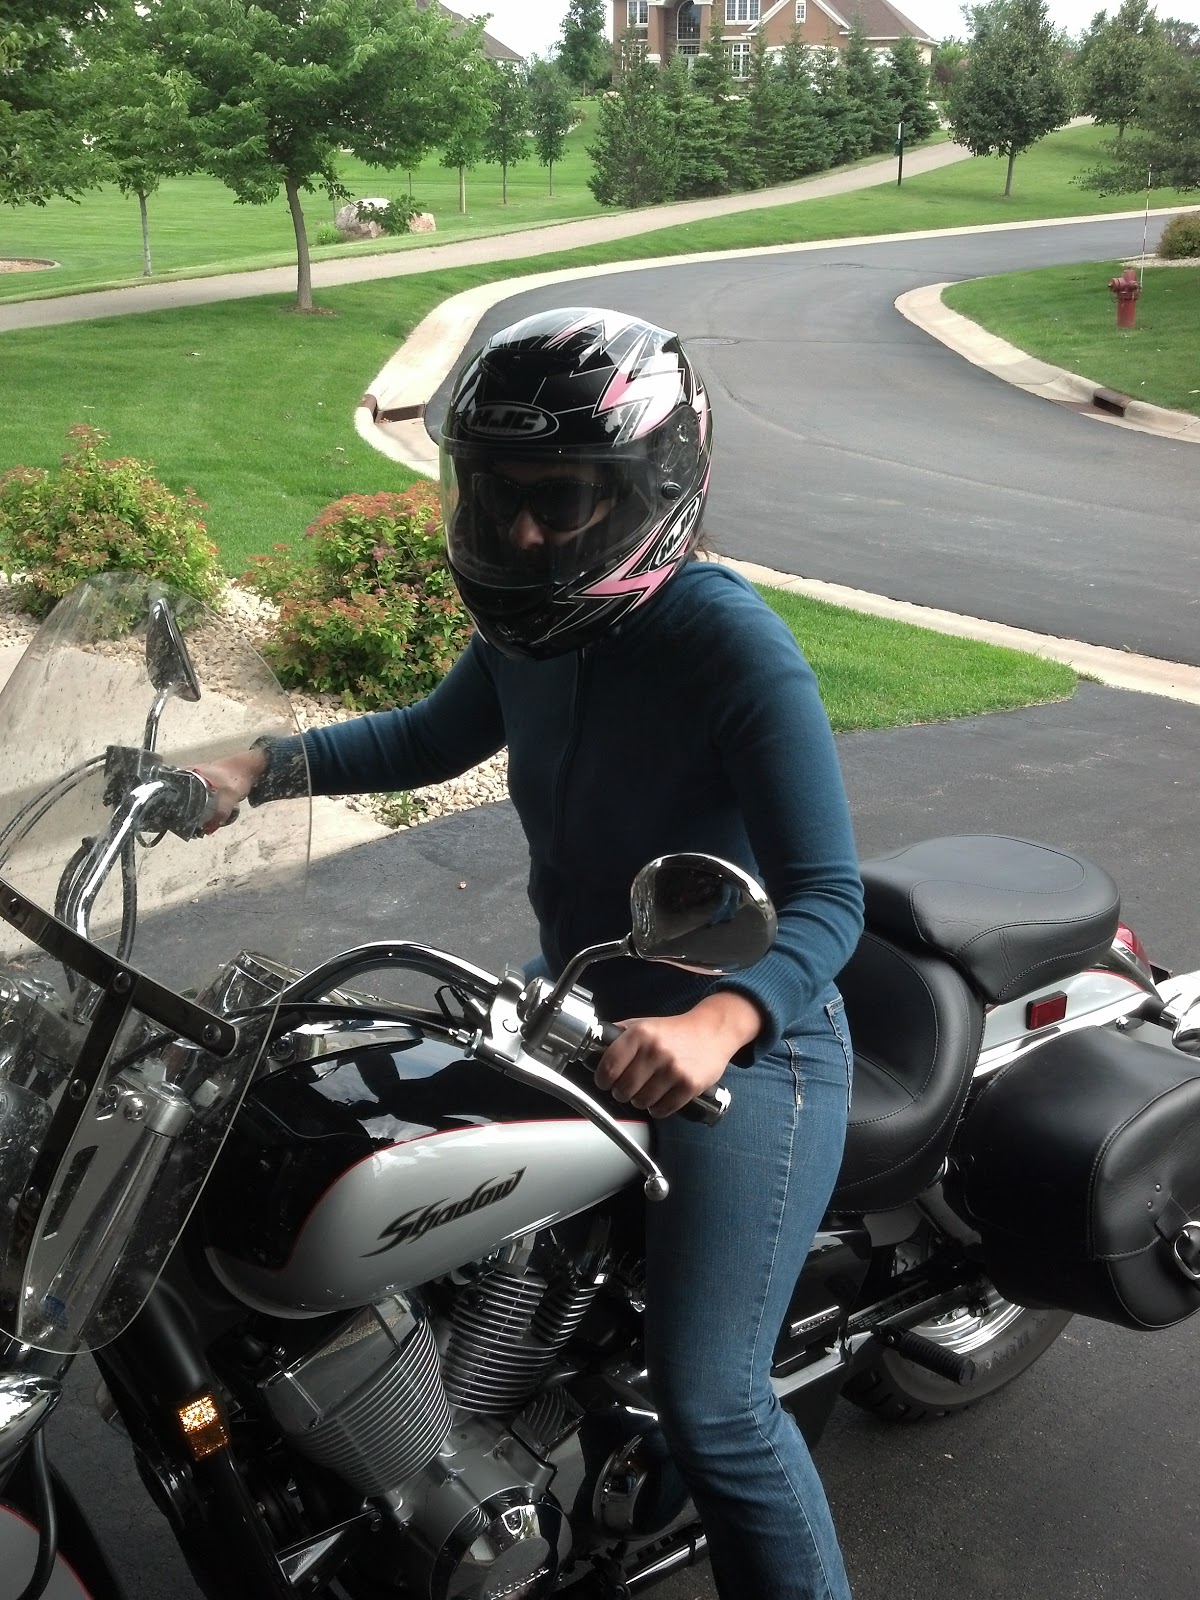 Laura Chaney Gerth on a motorcycle